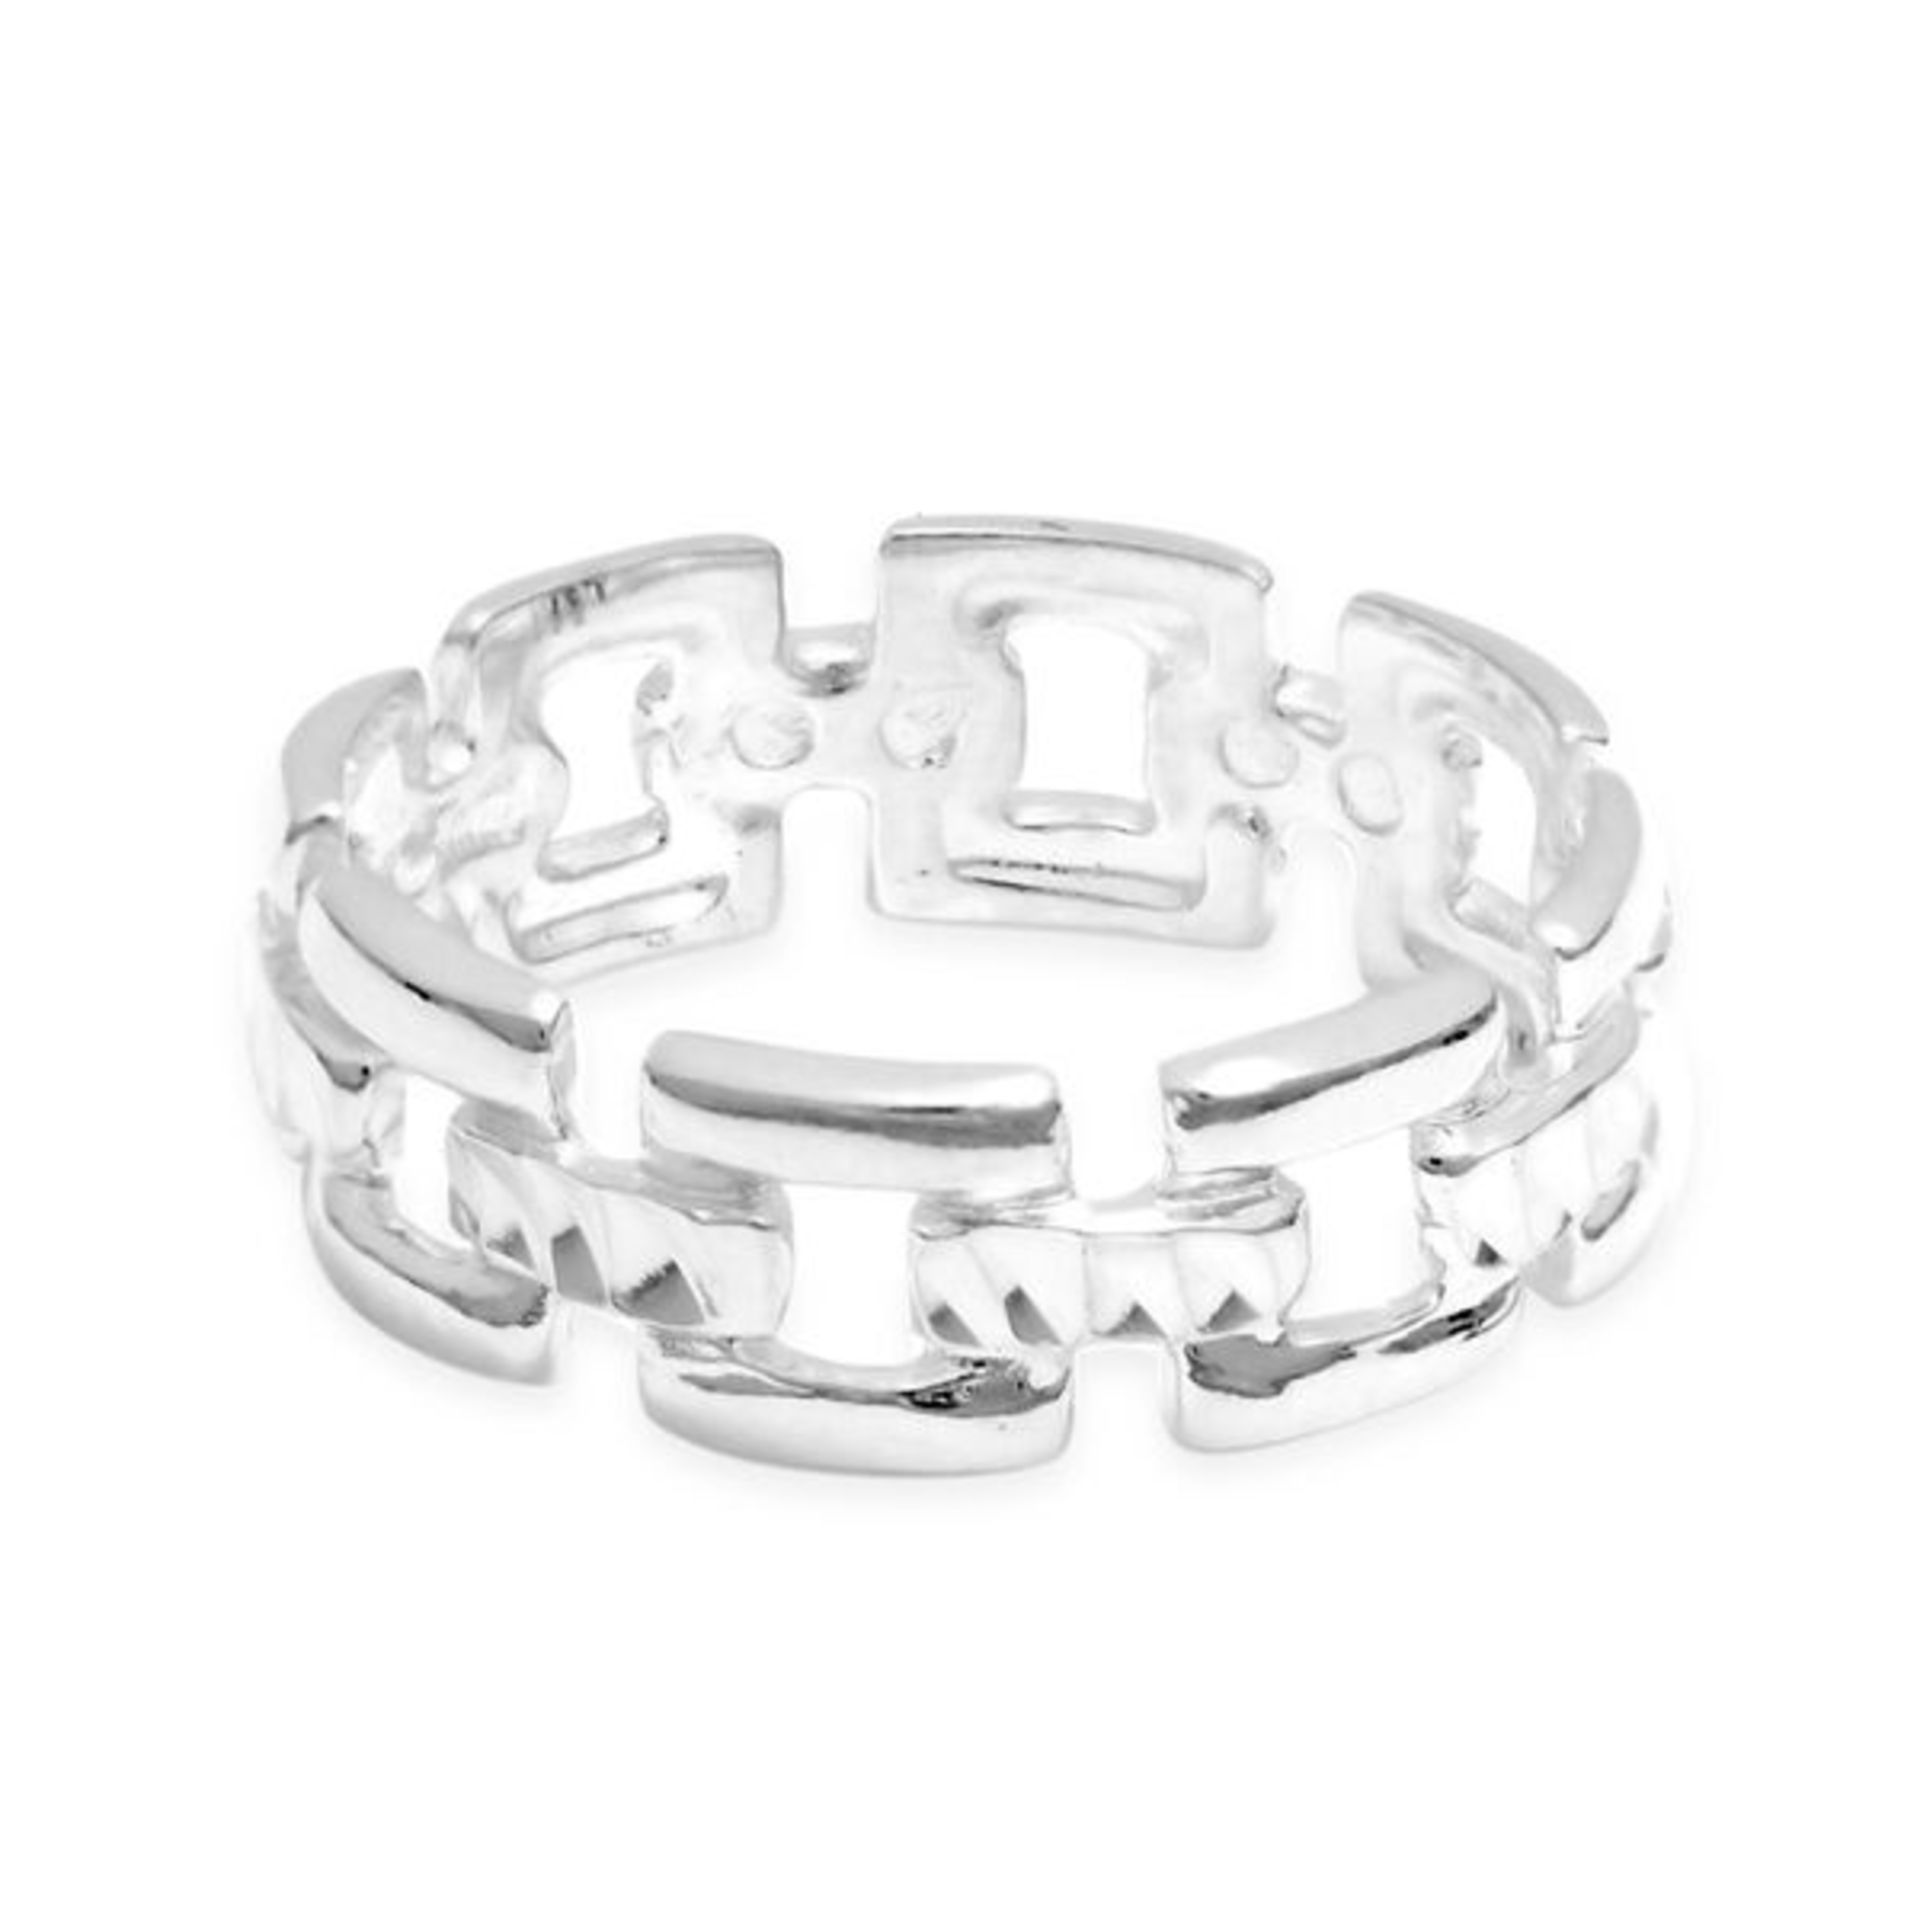 NEW!! Viale Argento Sterling Silver Square Link Chain Ring